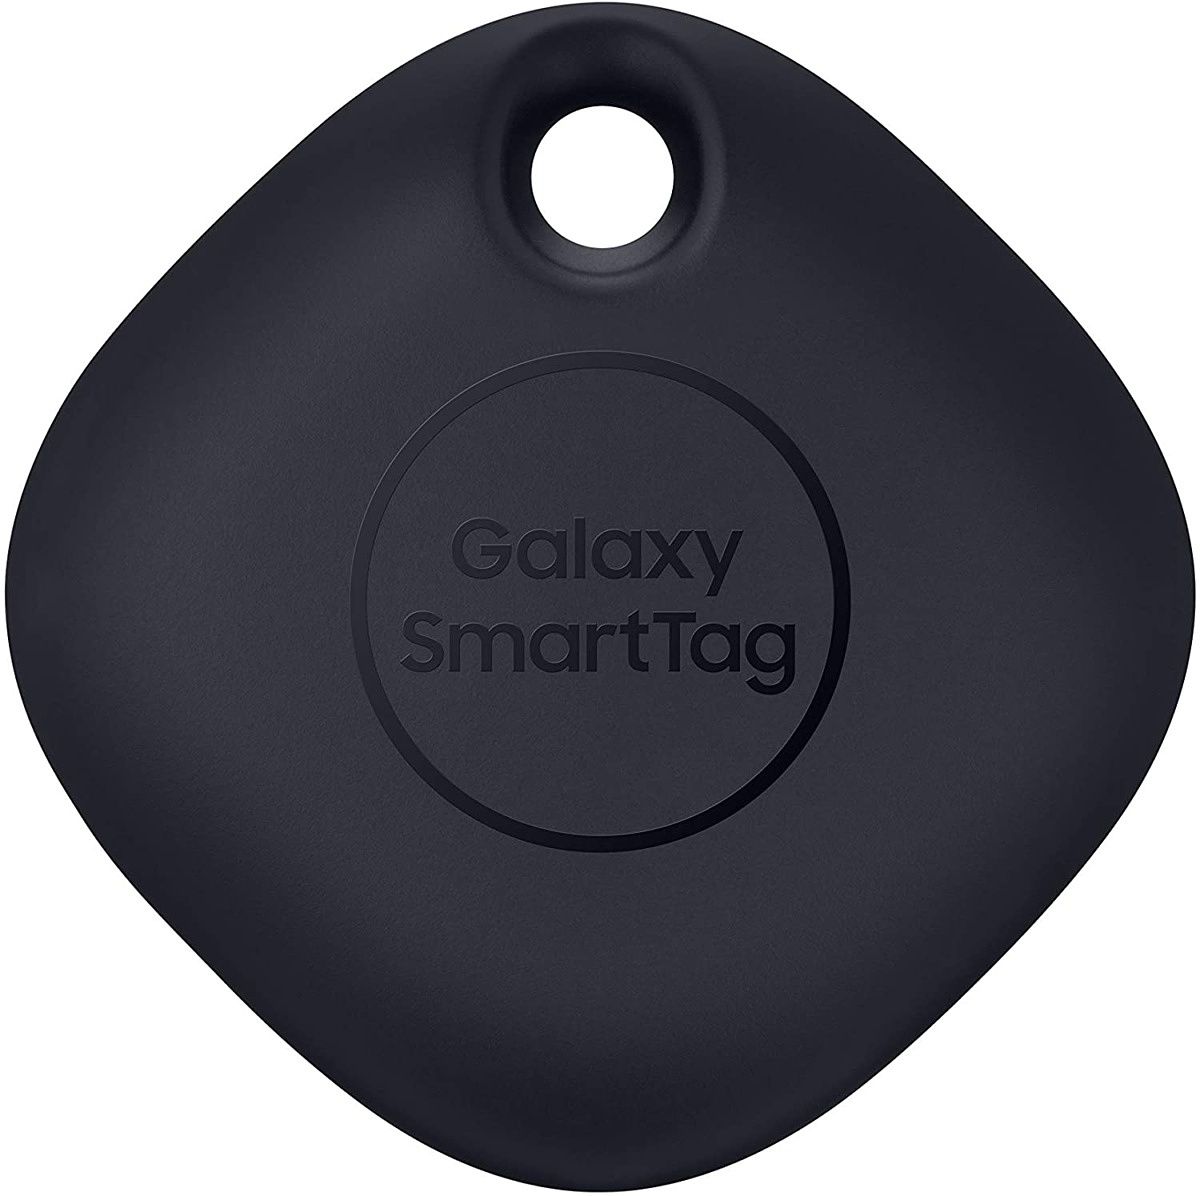 Samsung's Bluetooth tracker is half-off the normal price right now. An Amazon Prime membership is required to get the discount.